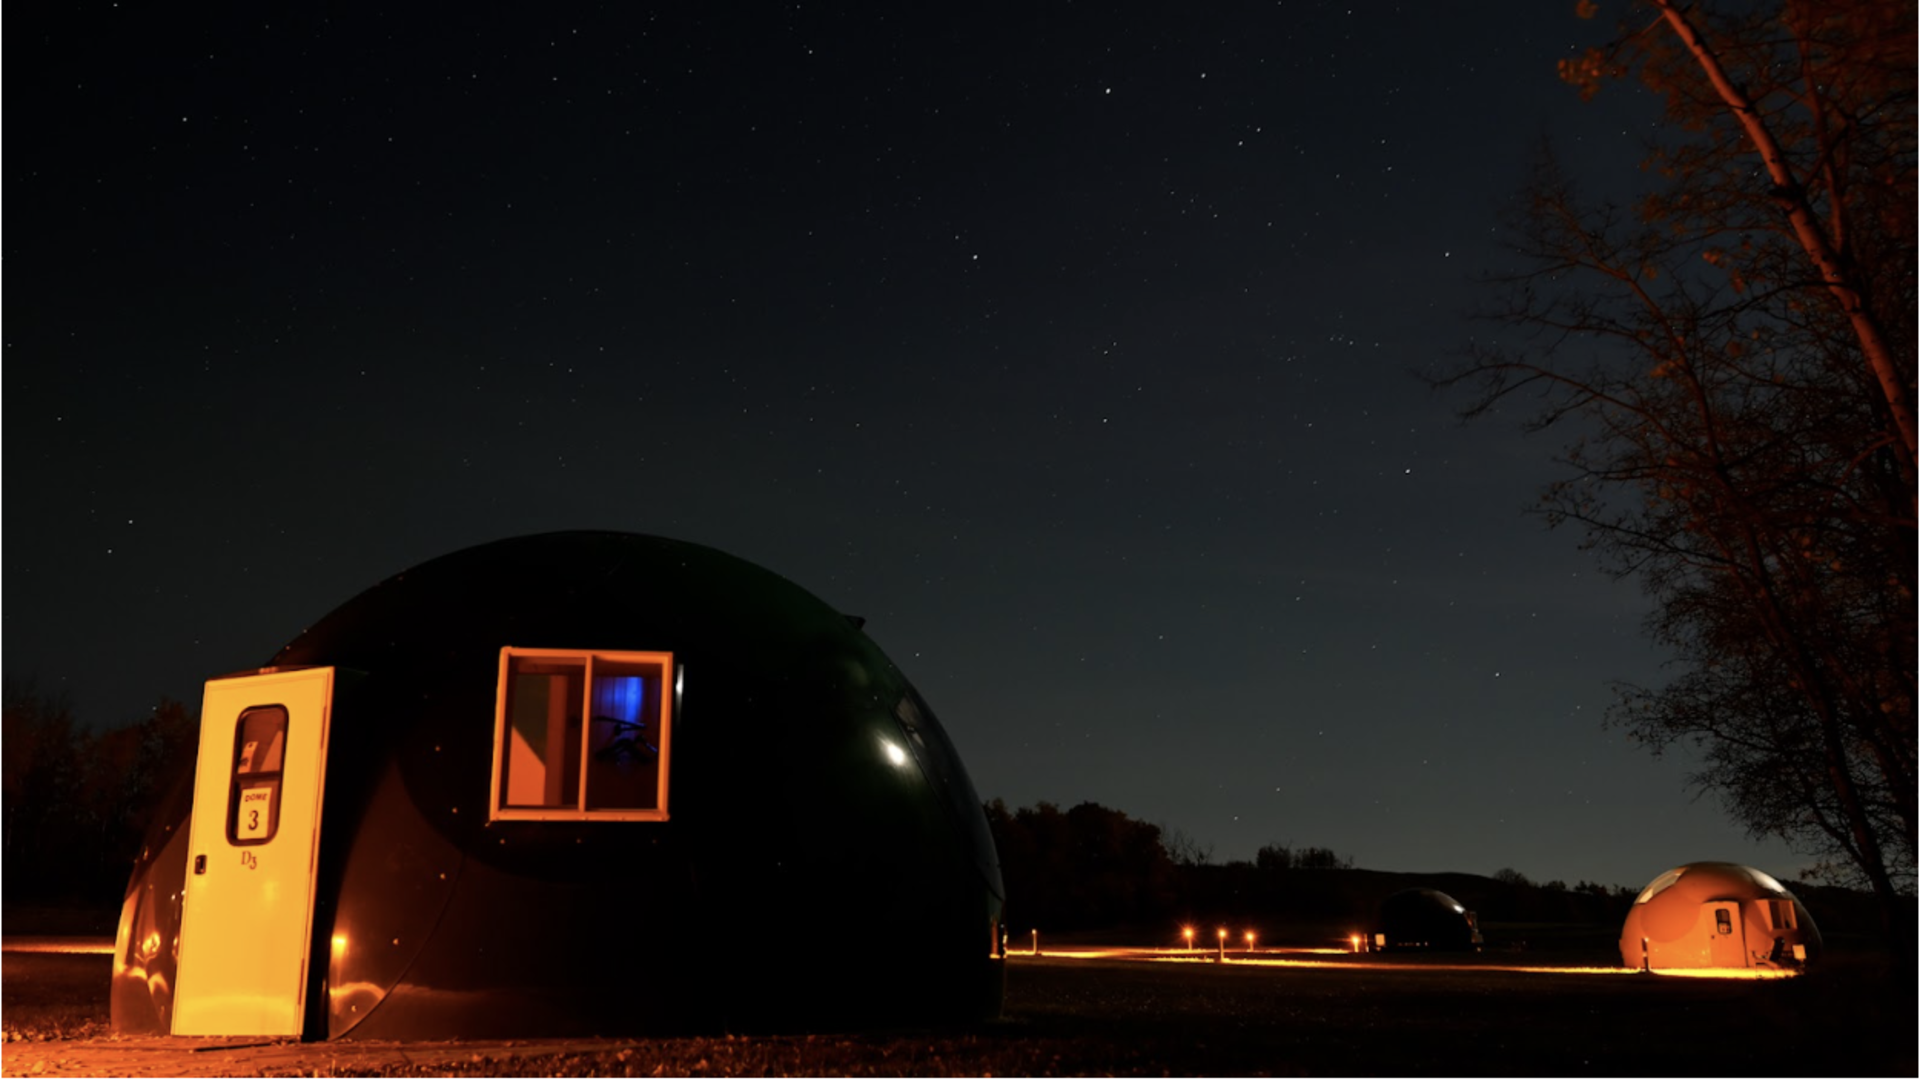 Learn how Indigenous peoples mastered the stars in these comfy new domes